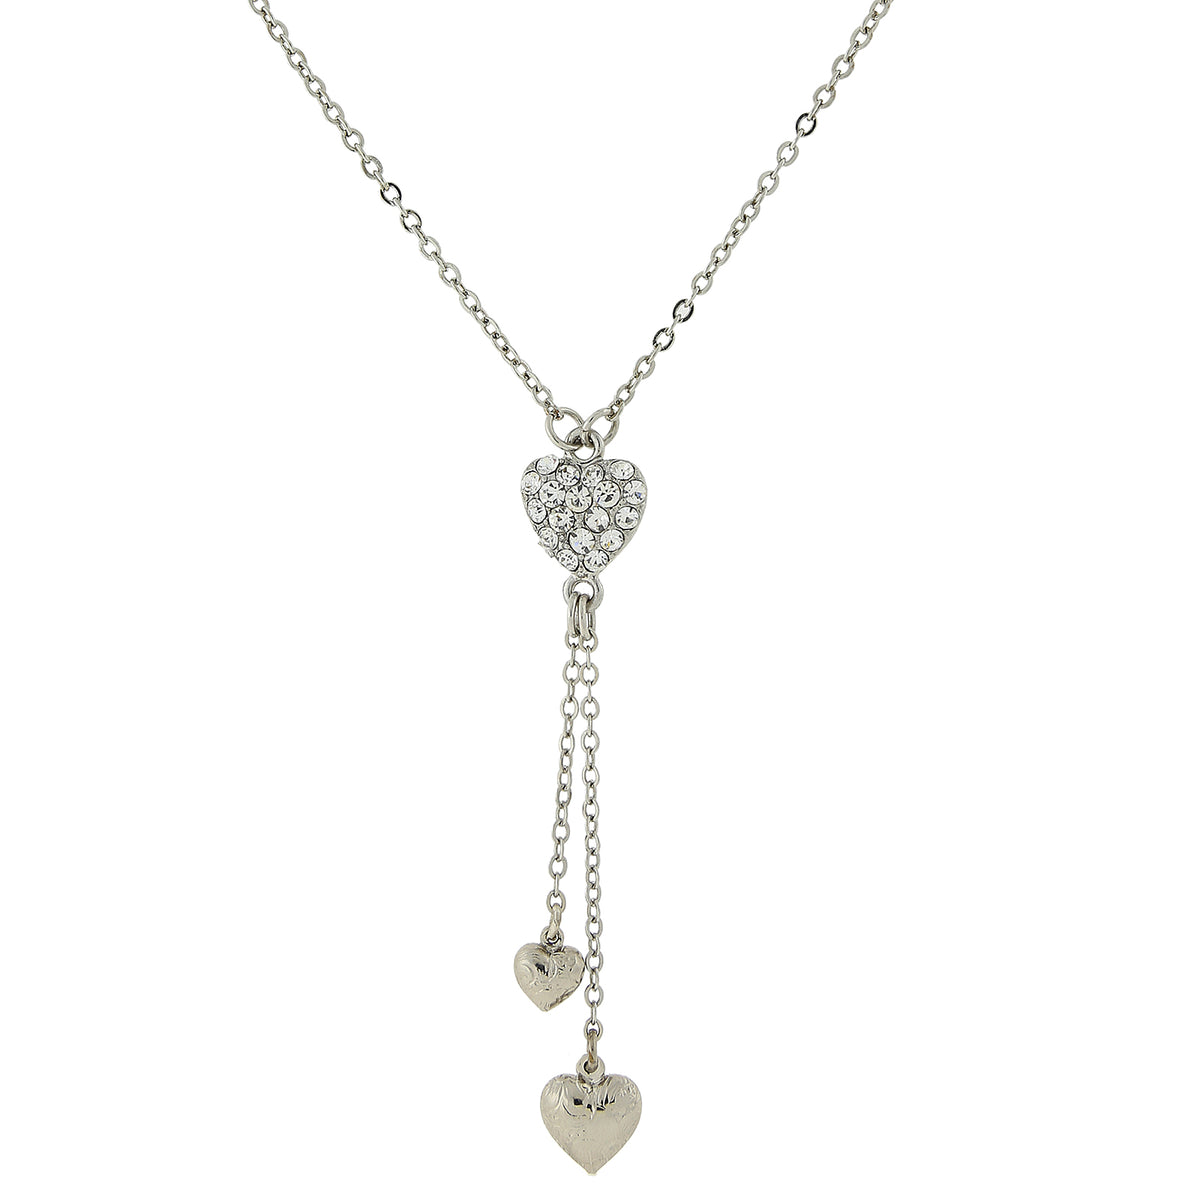 1928 Jewelry Crystal Heart Pendant Necklace With Tassel Drops 16